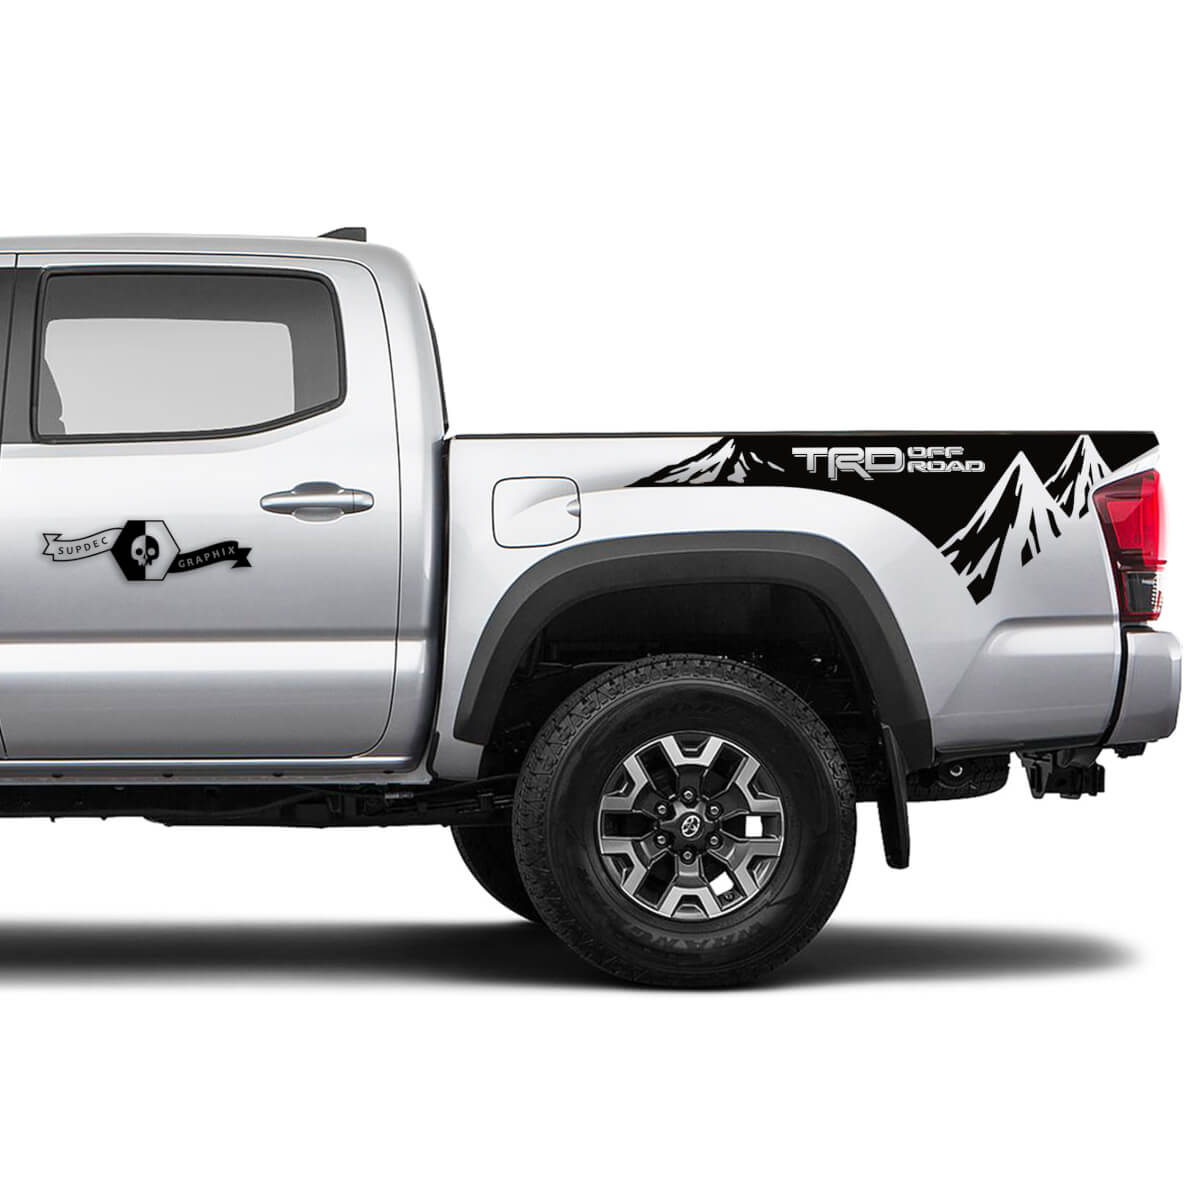 Pair TRD Off Road Side Tailgate Bed Mountain Vinyl Stickers TOYOTA Colors Decals Stickers for Tacoma Tundra 4Runner Hilux